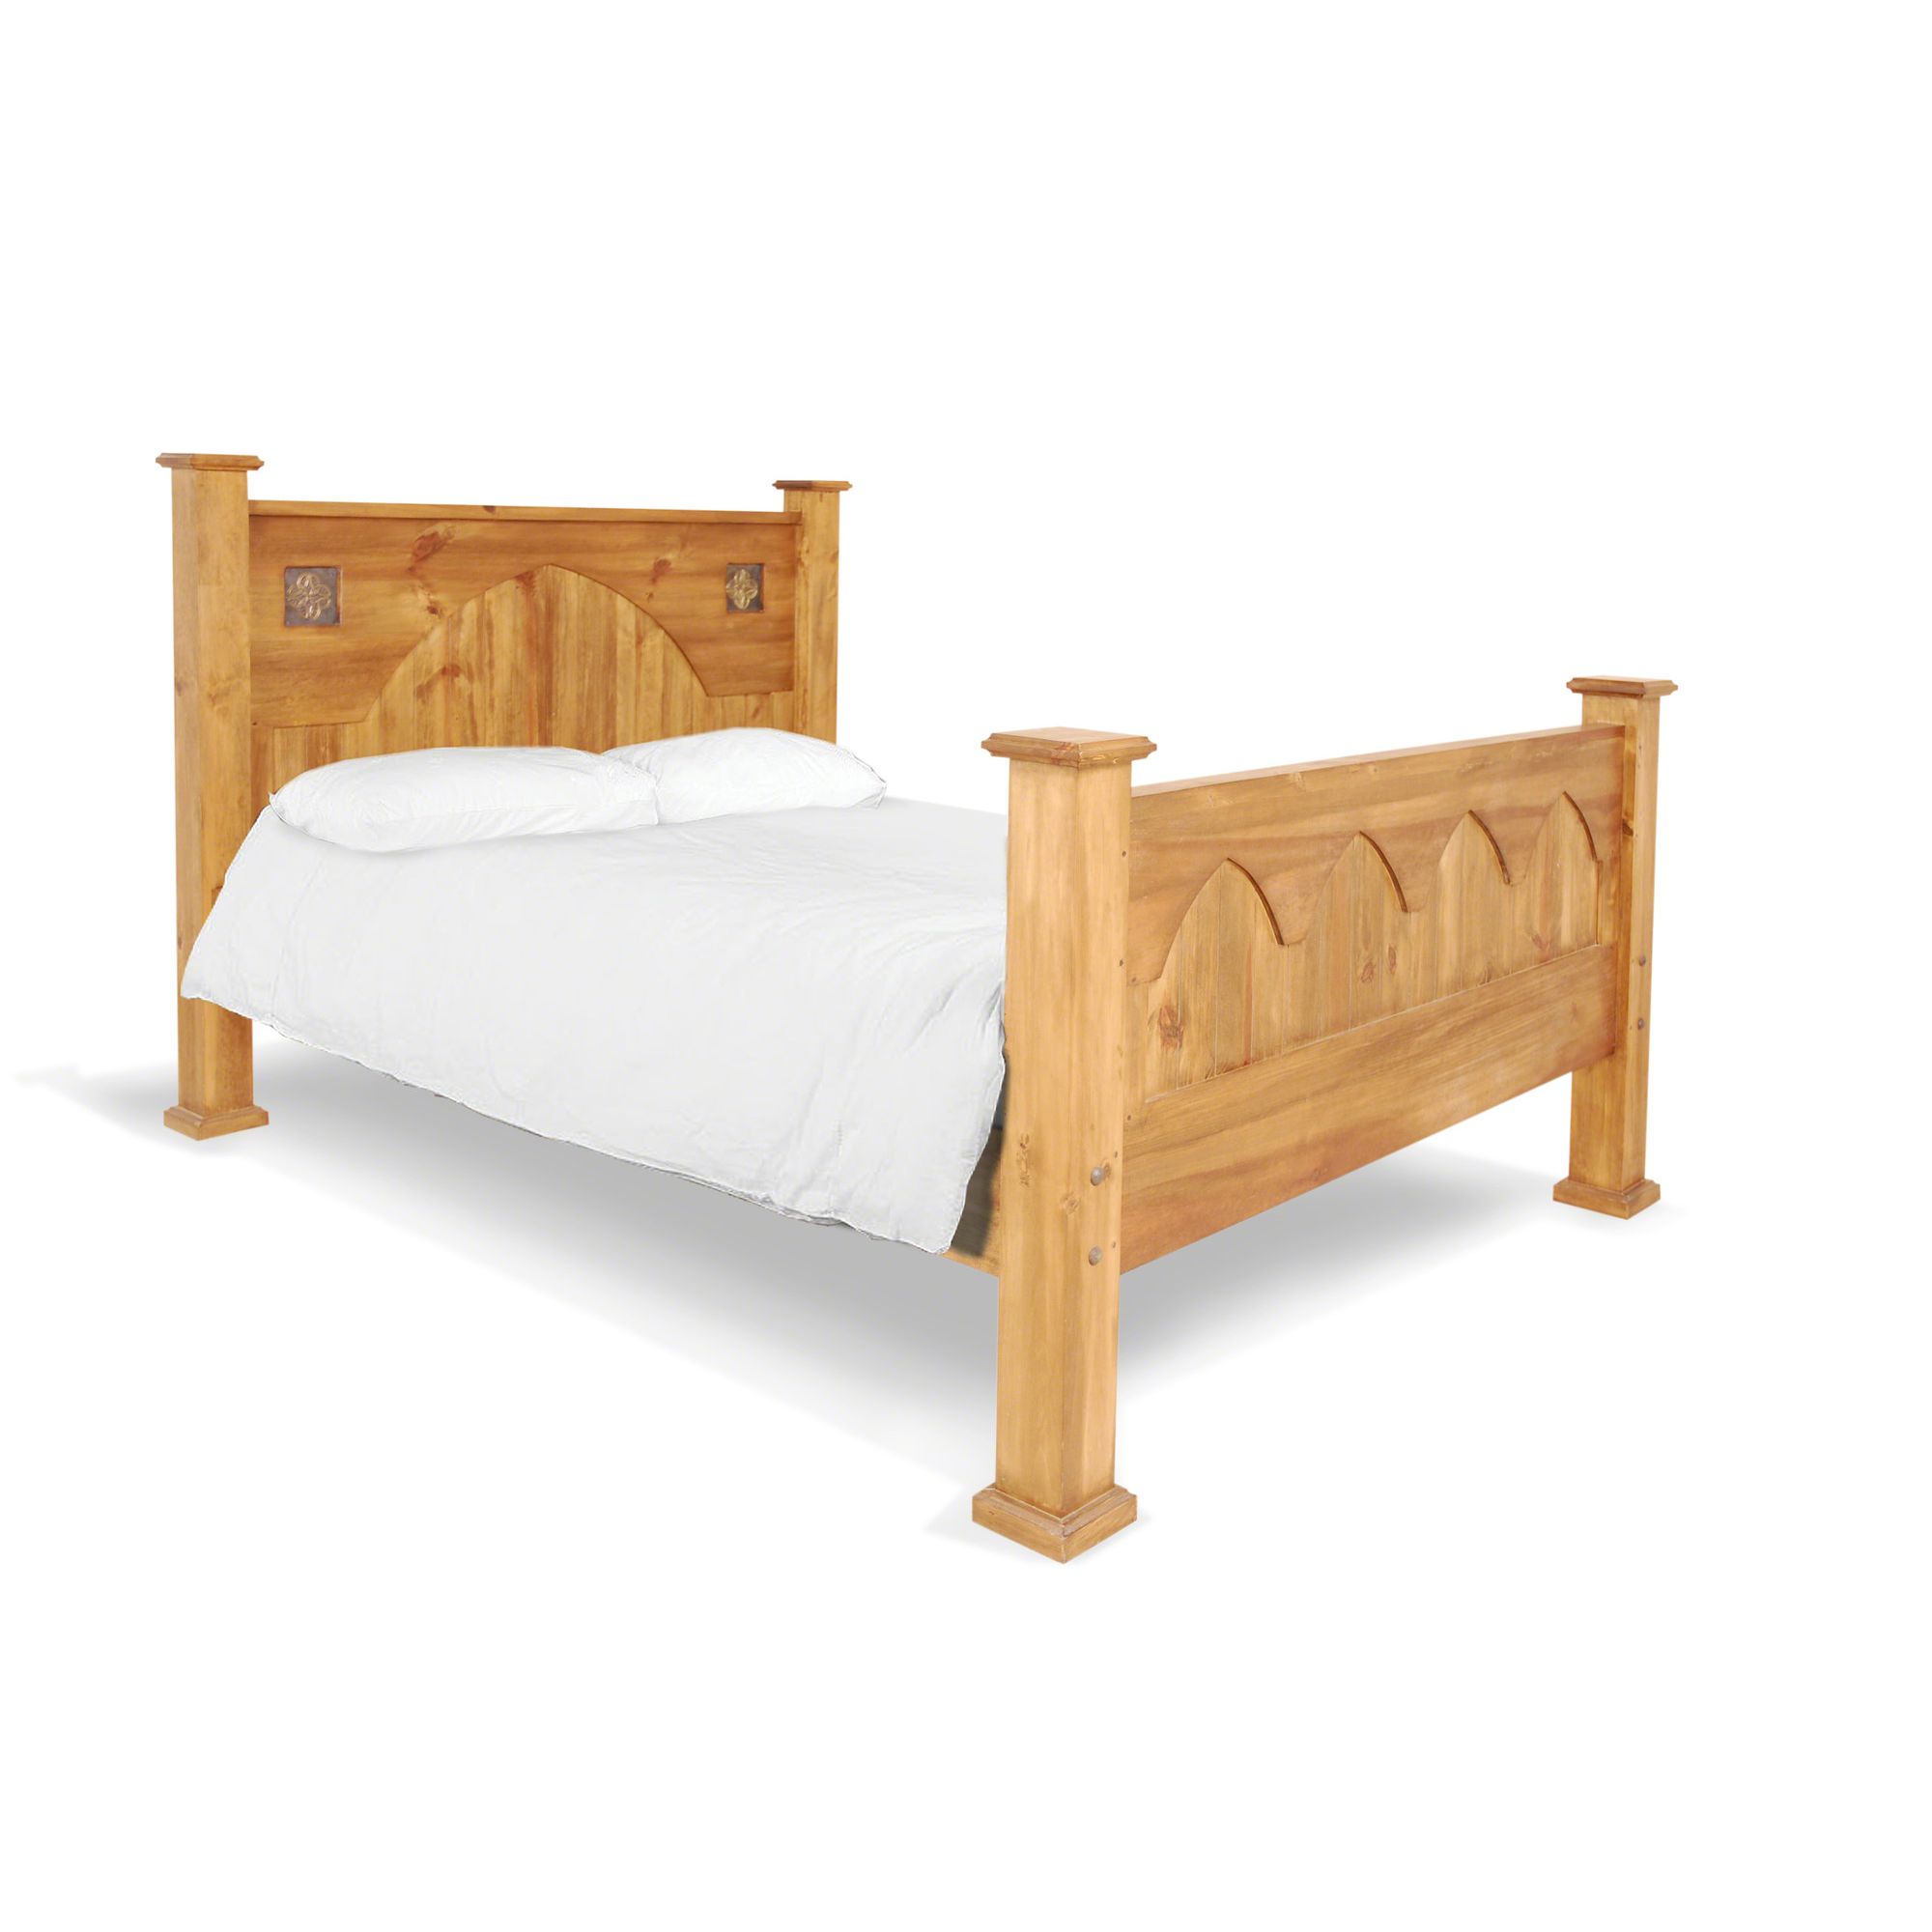 Oceans Apart Vintage Gothic Bed Frame - Double at Tesco Direct